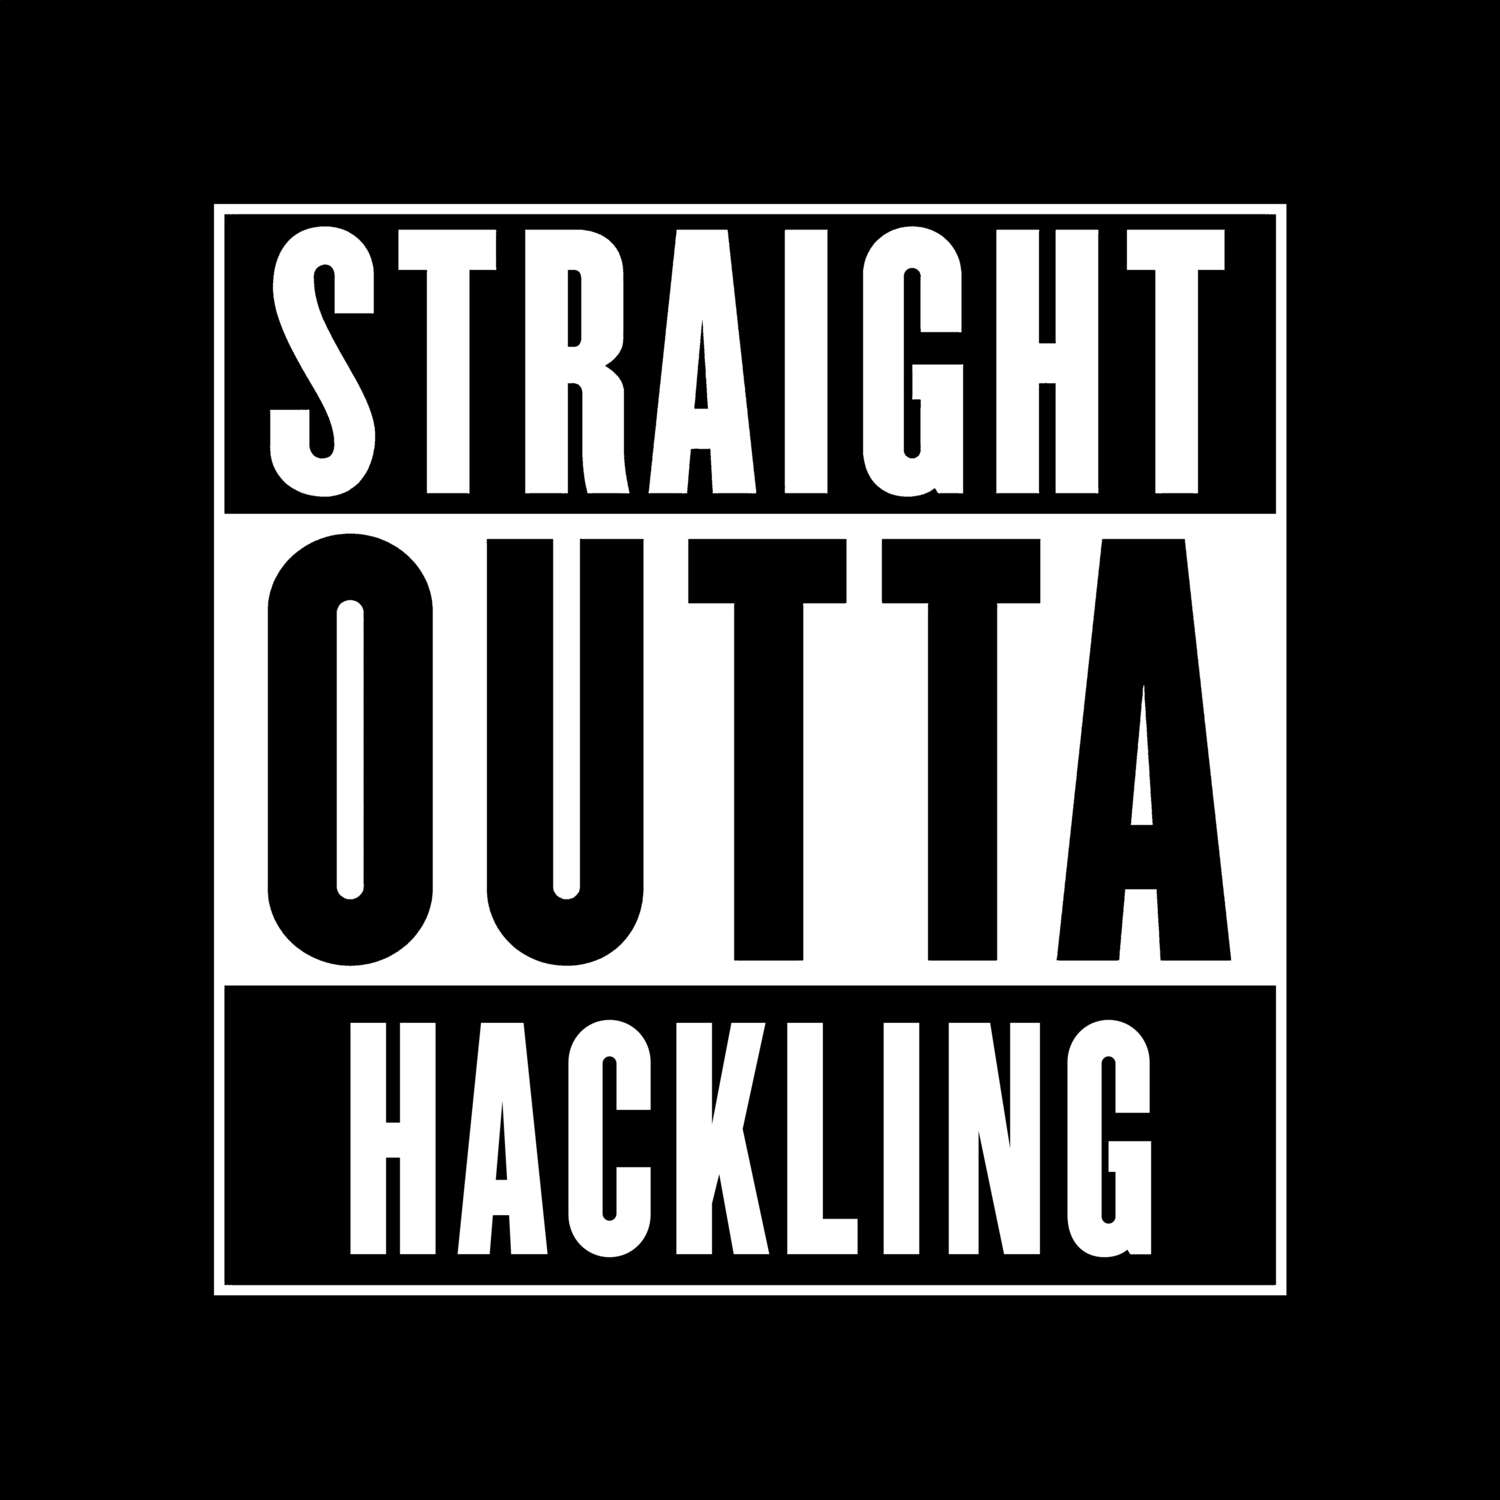 Hackling T-Shirt »Straight Outta«